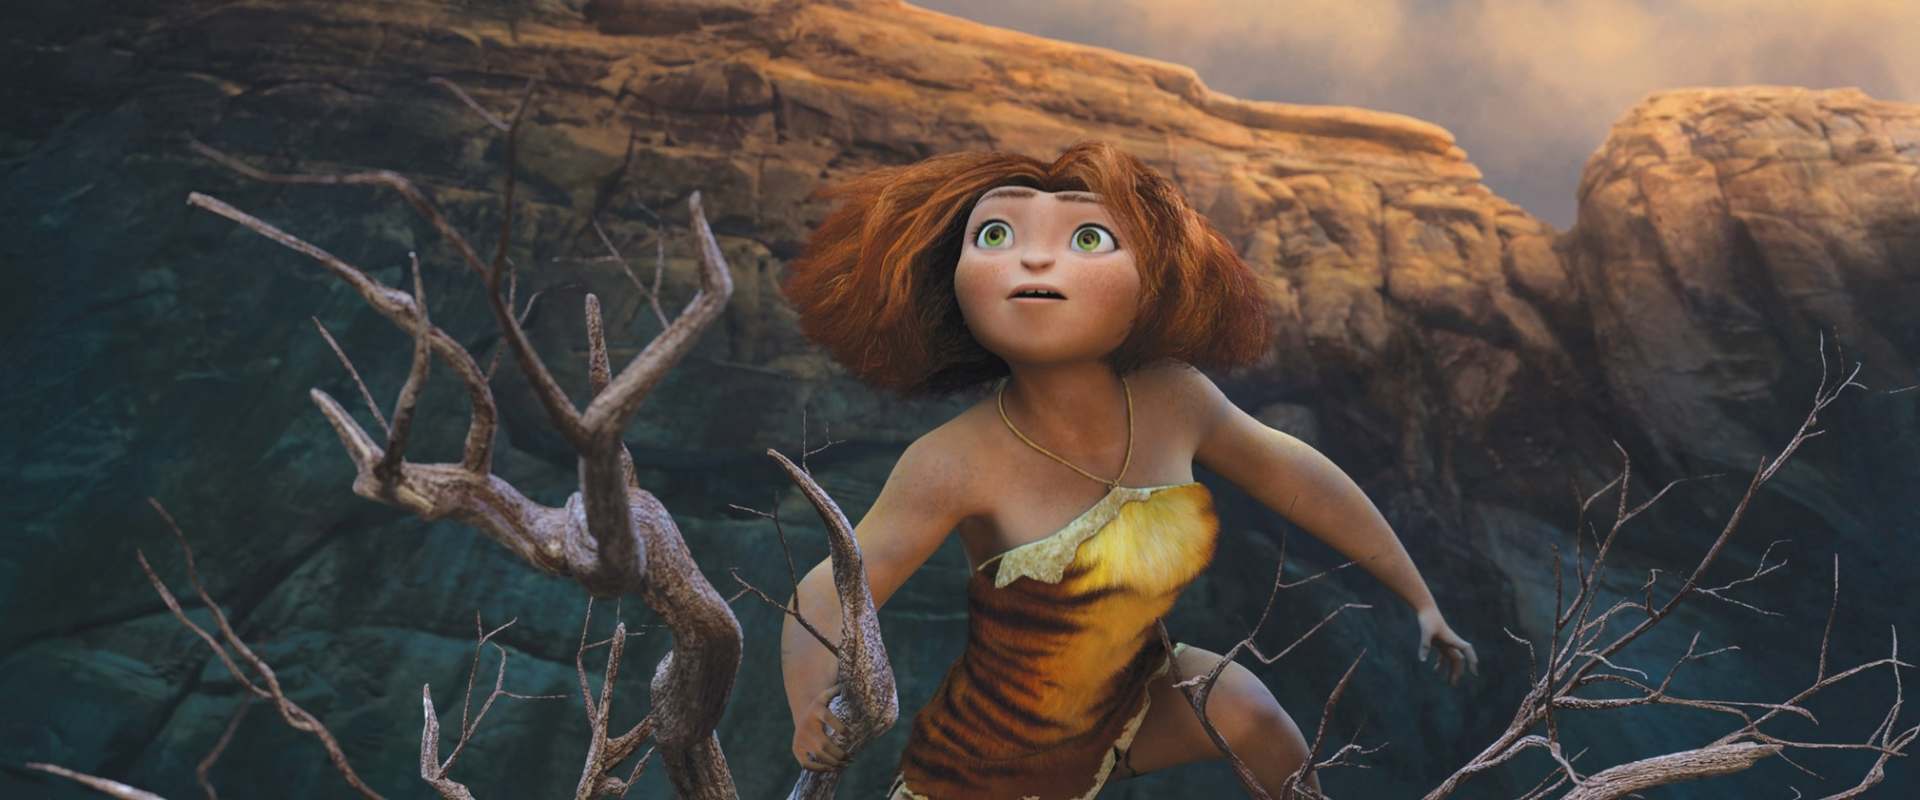 The Croods background 2